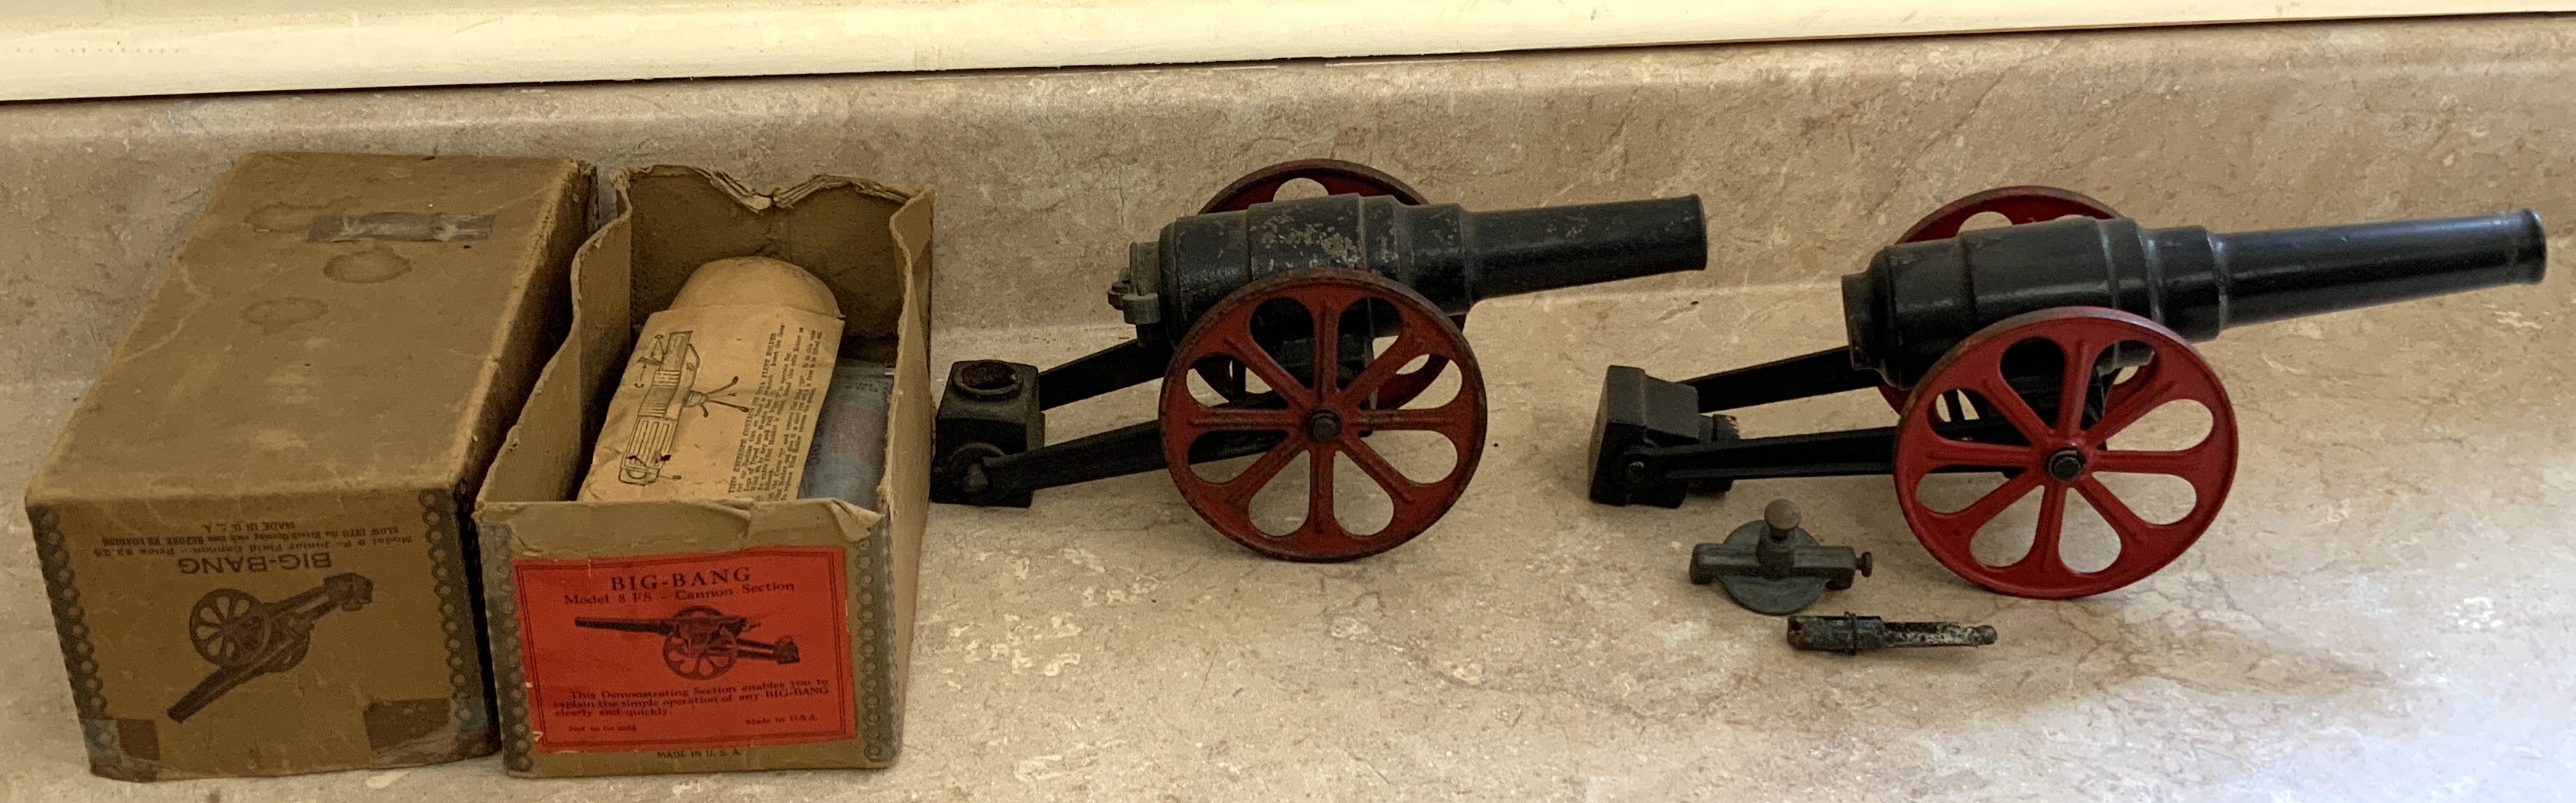  3 BIG BANG CARBIDE CANNONS With 2c8877